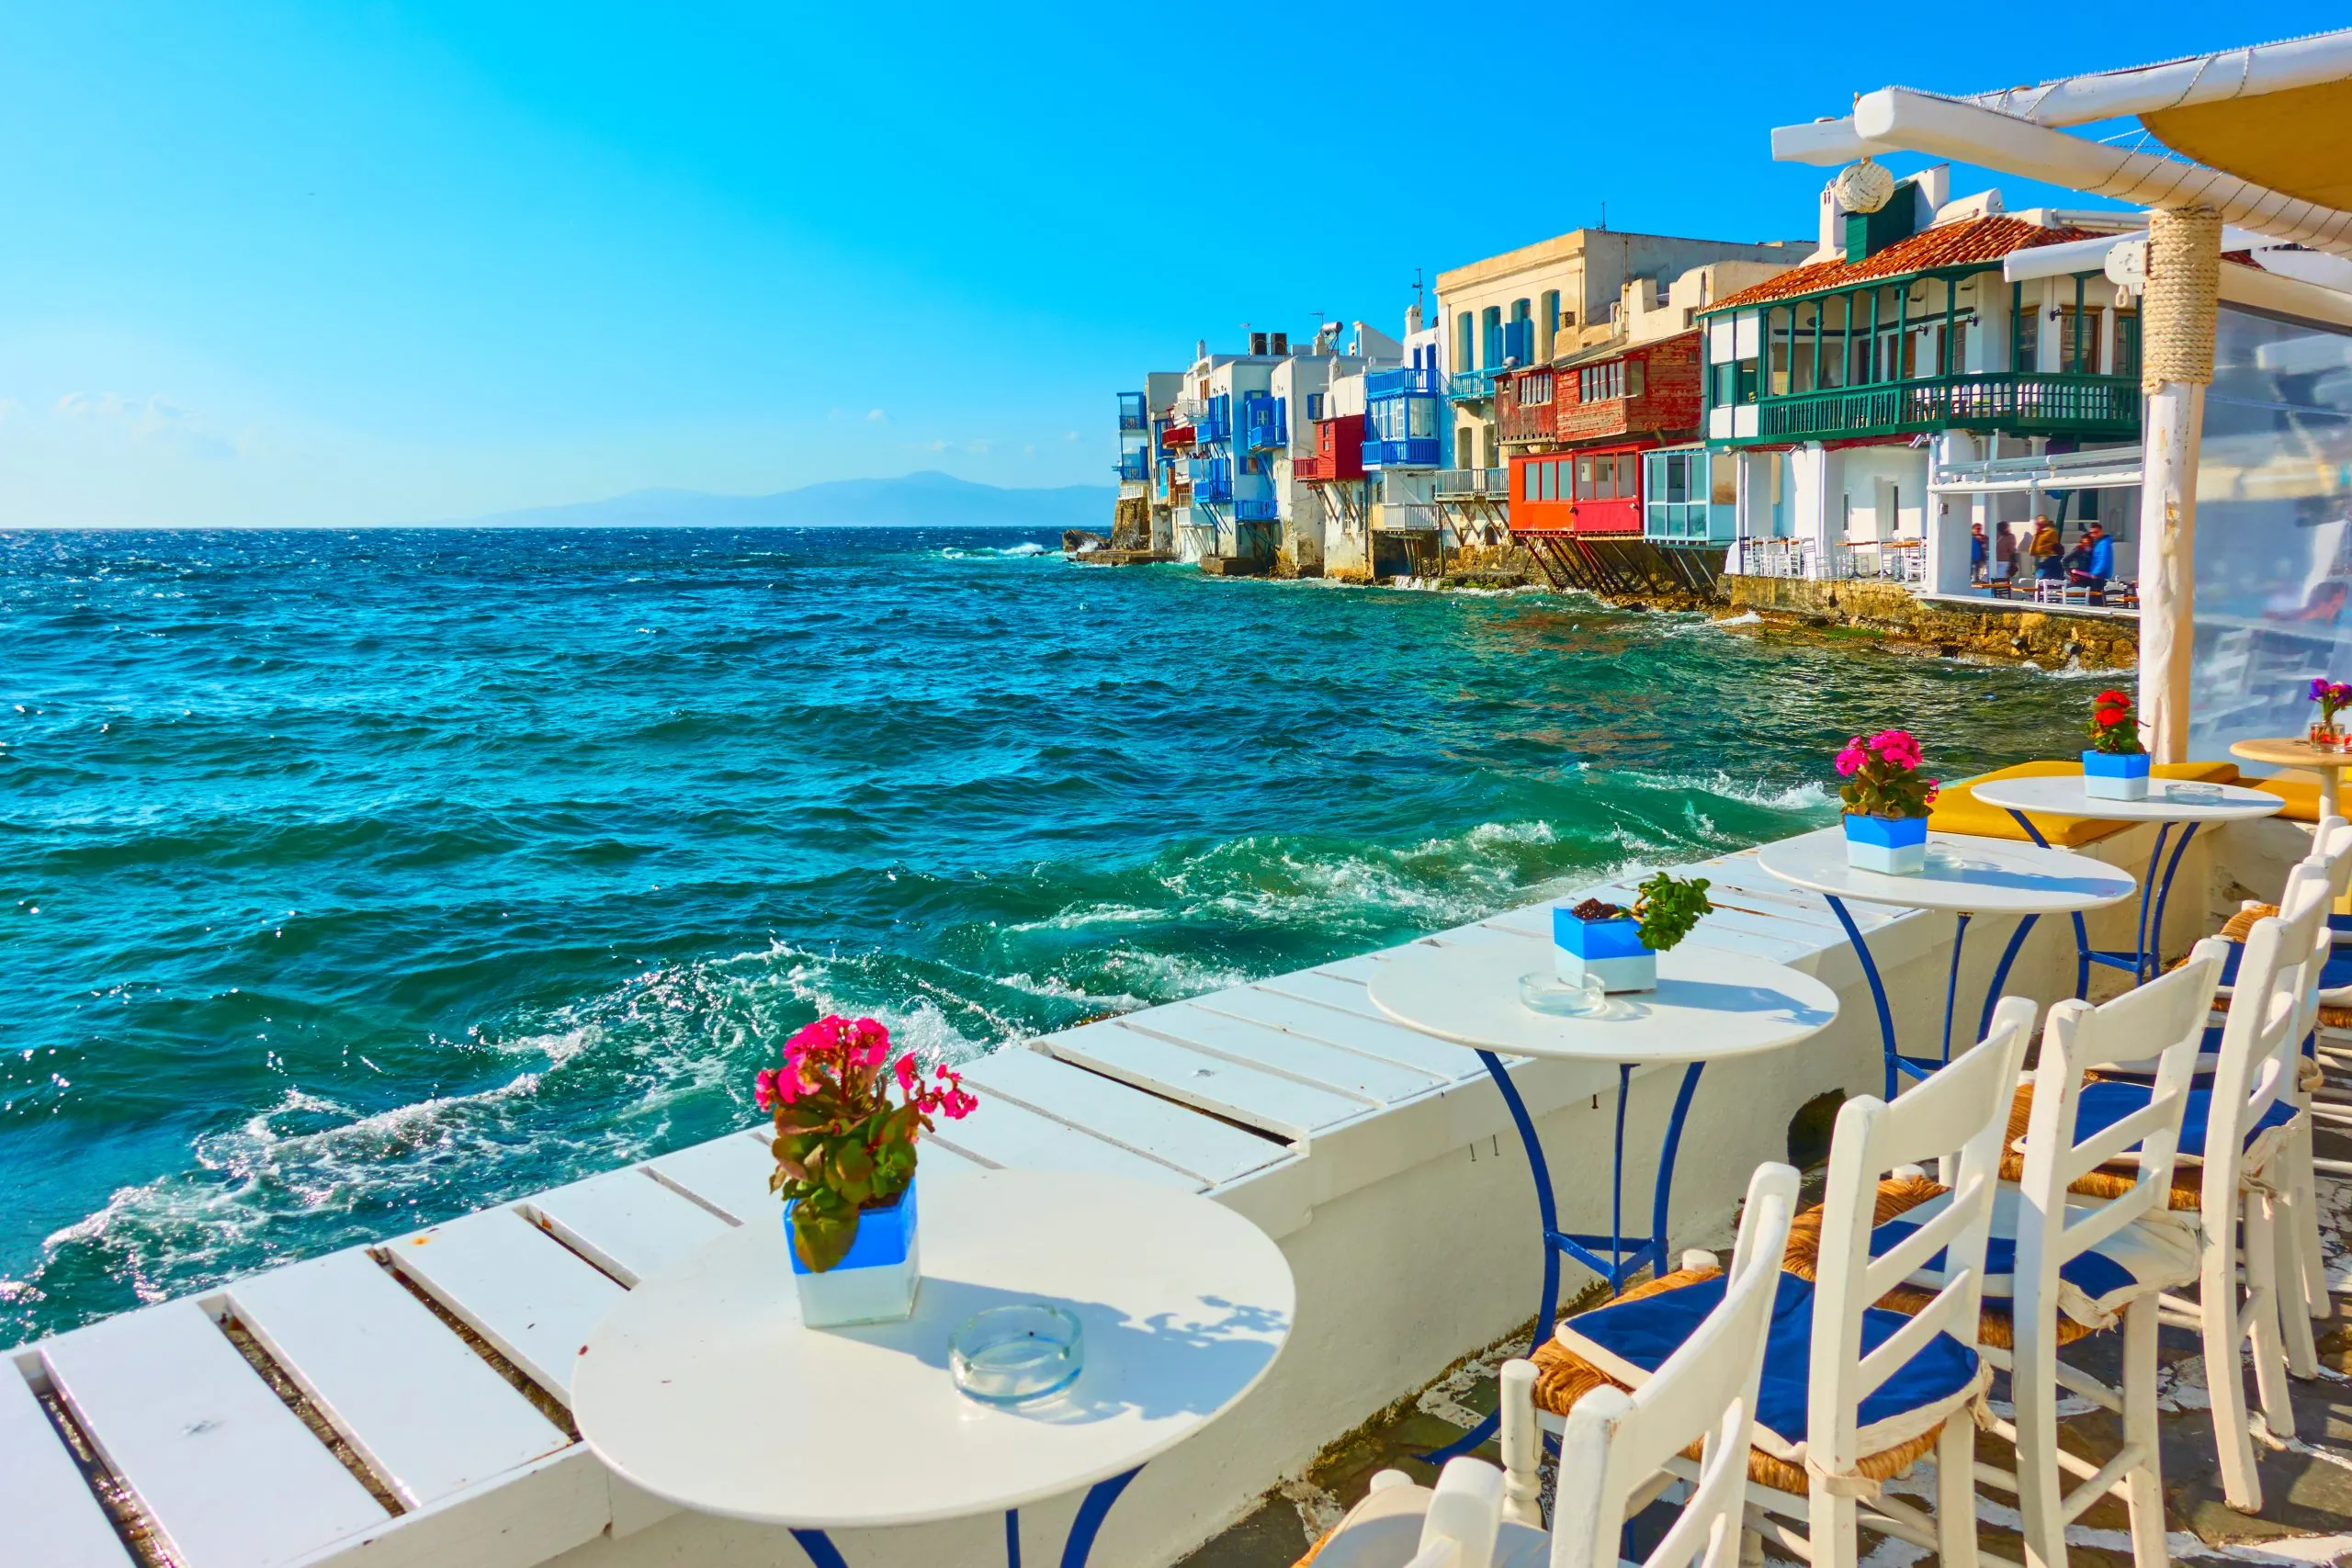 Small cafe by the sea in Mykonos